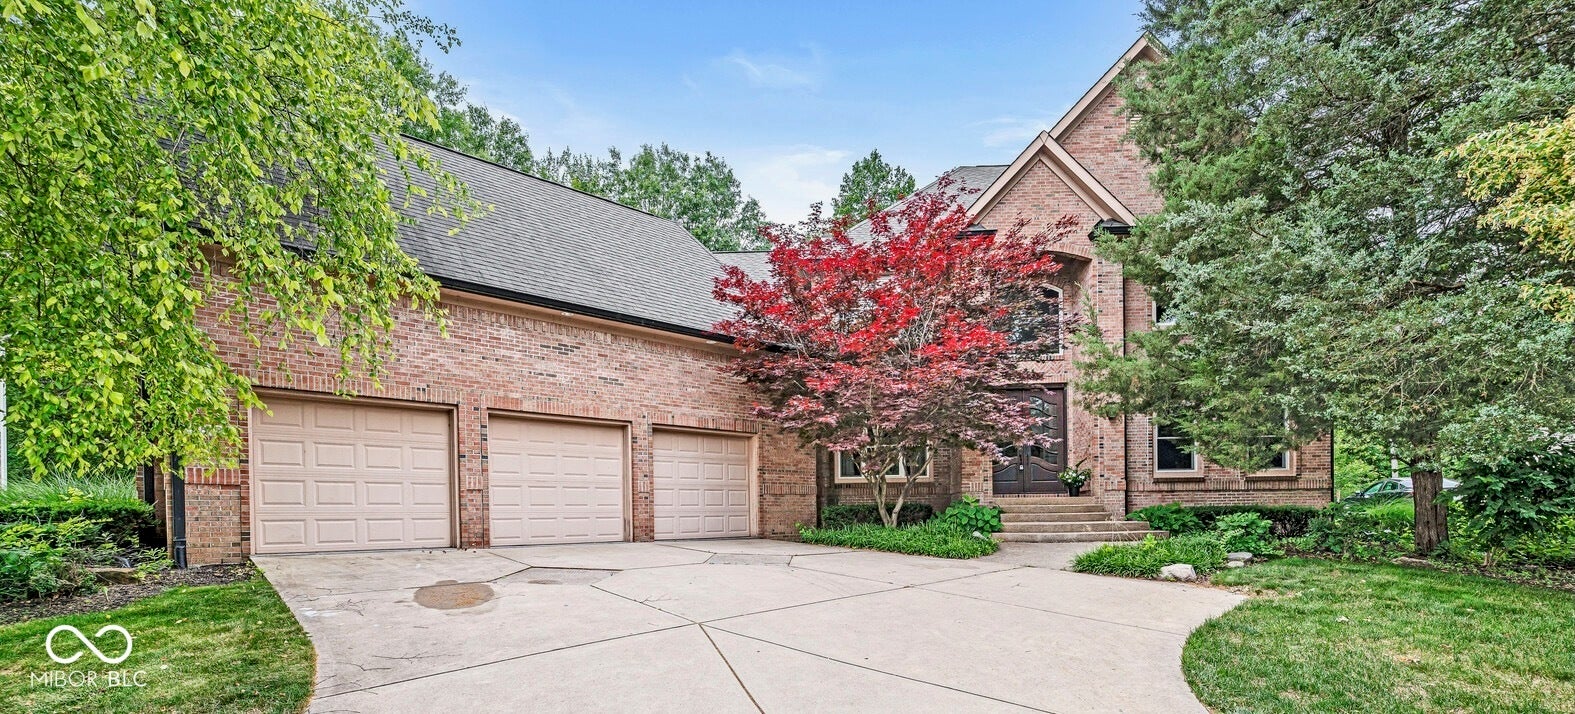 7842 Preservation Drive, Indianapolis